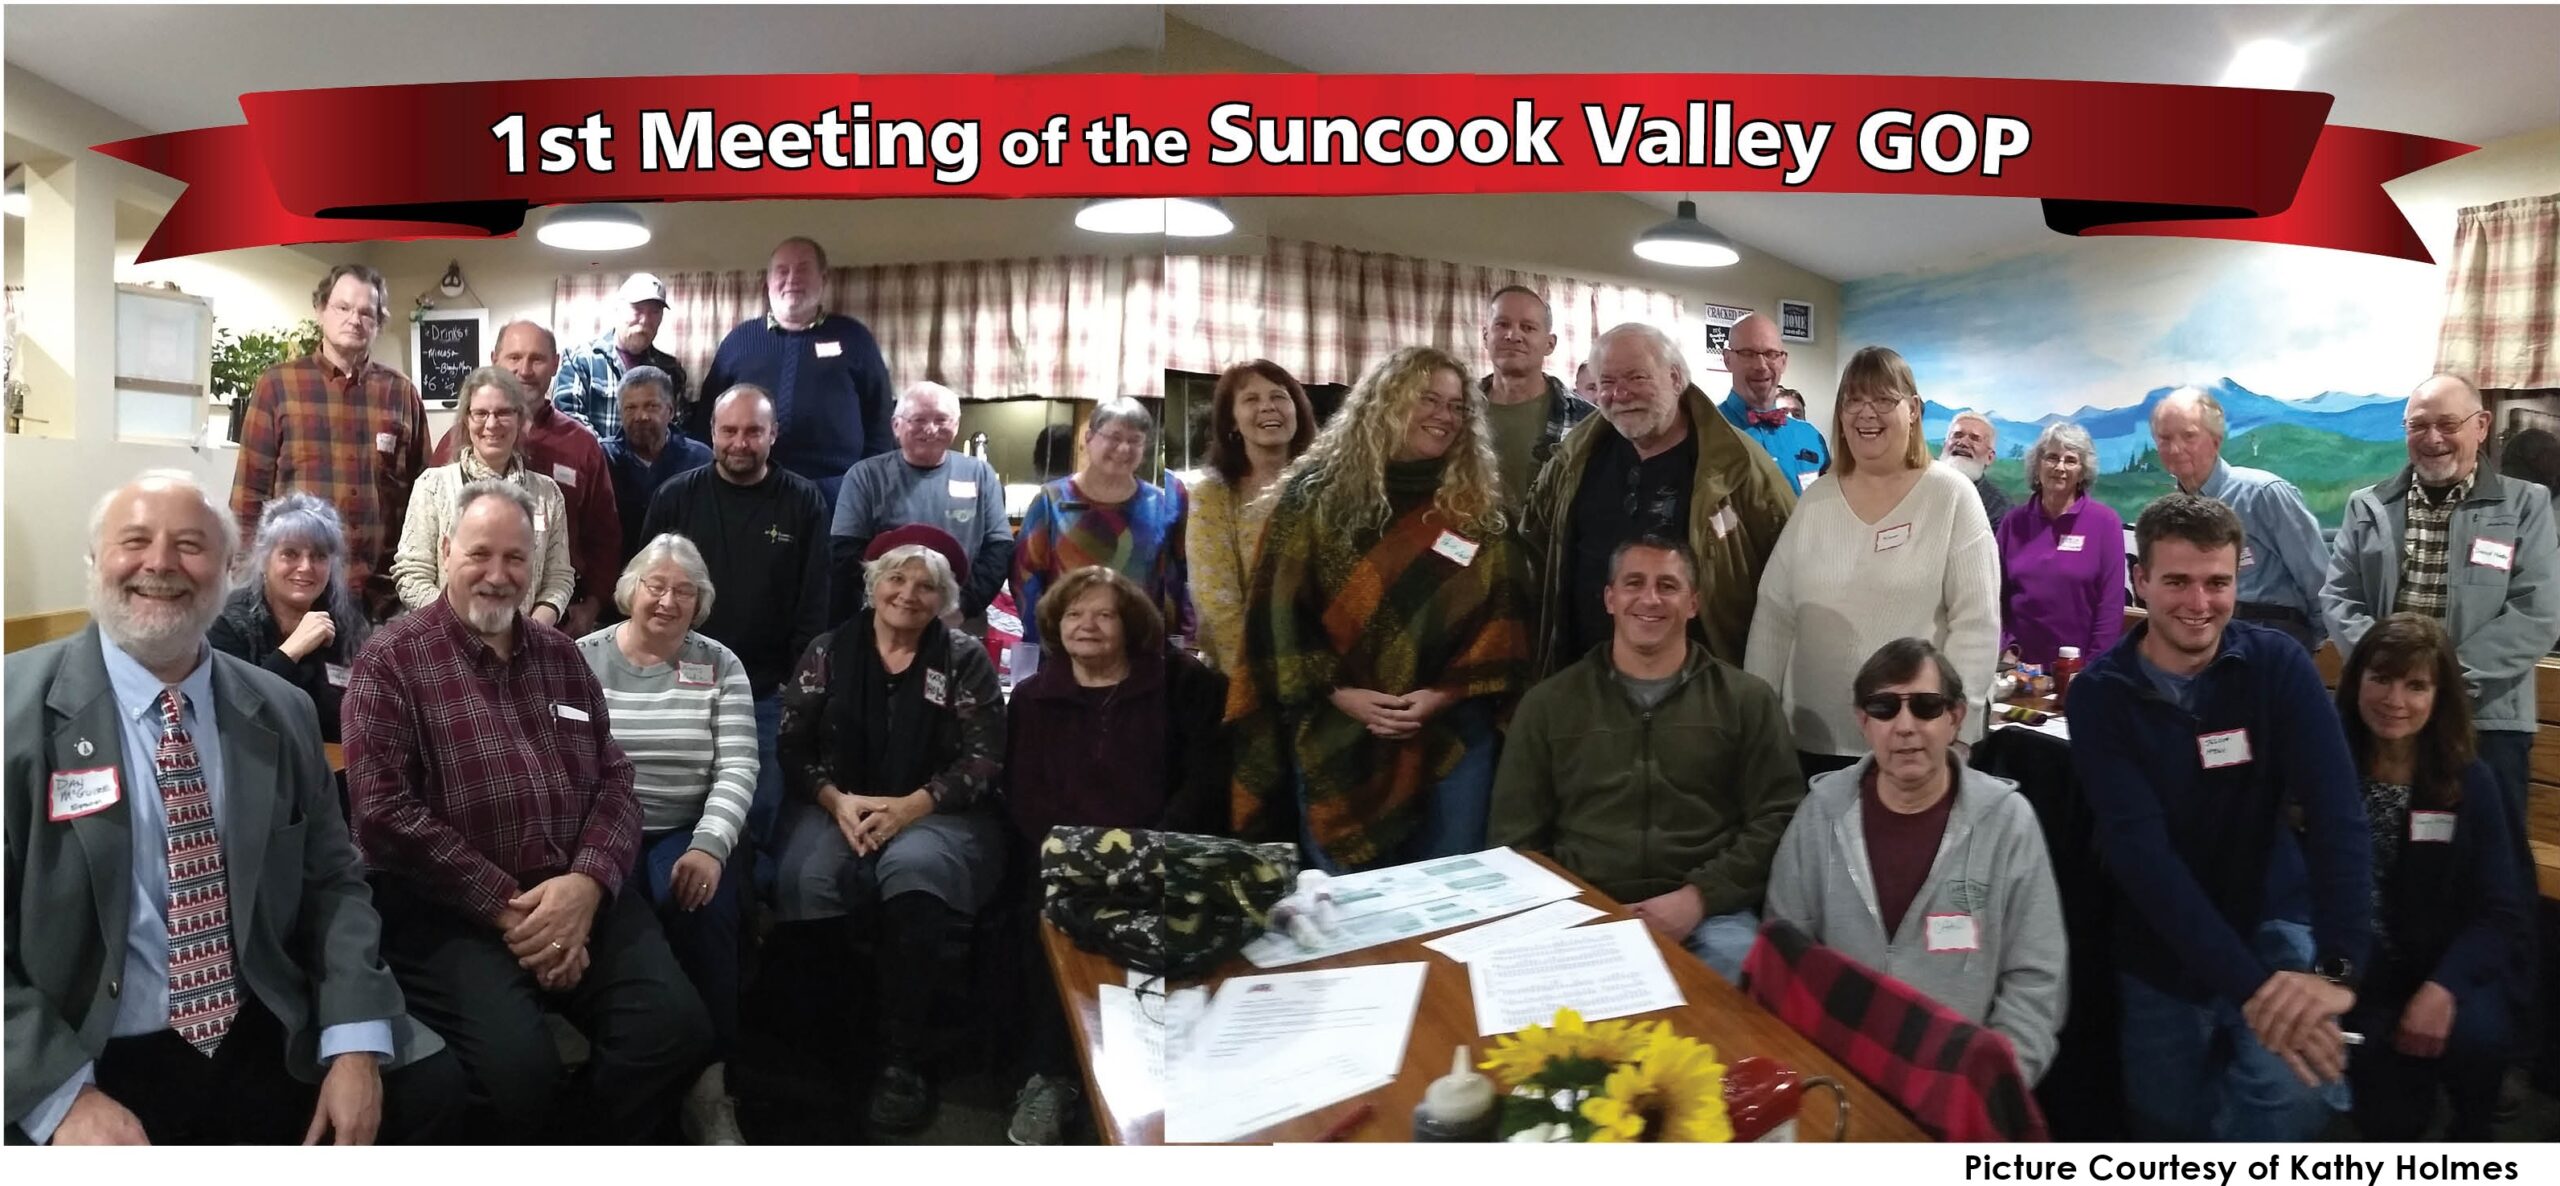 Welcome to the Suncook Valley GOP